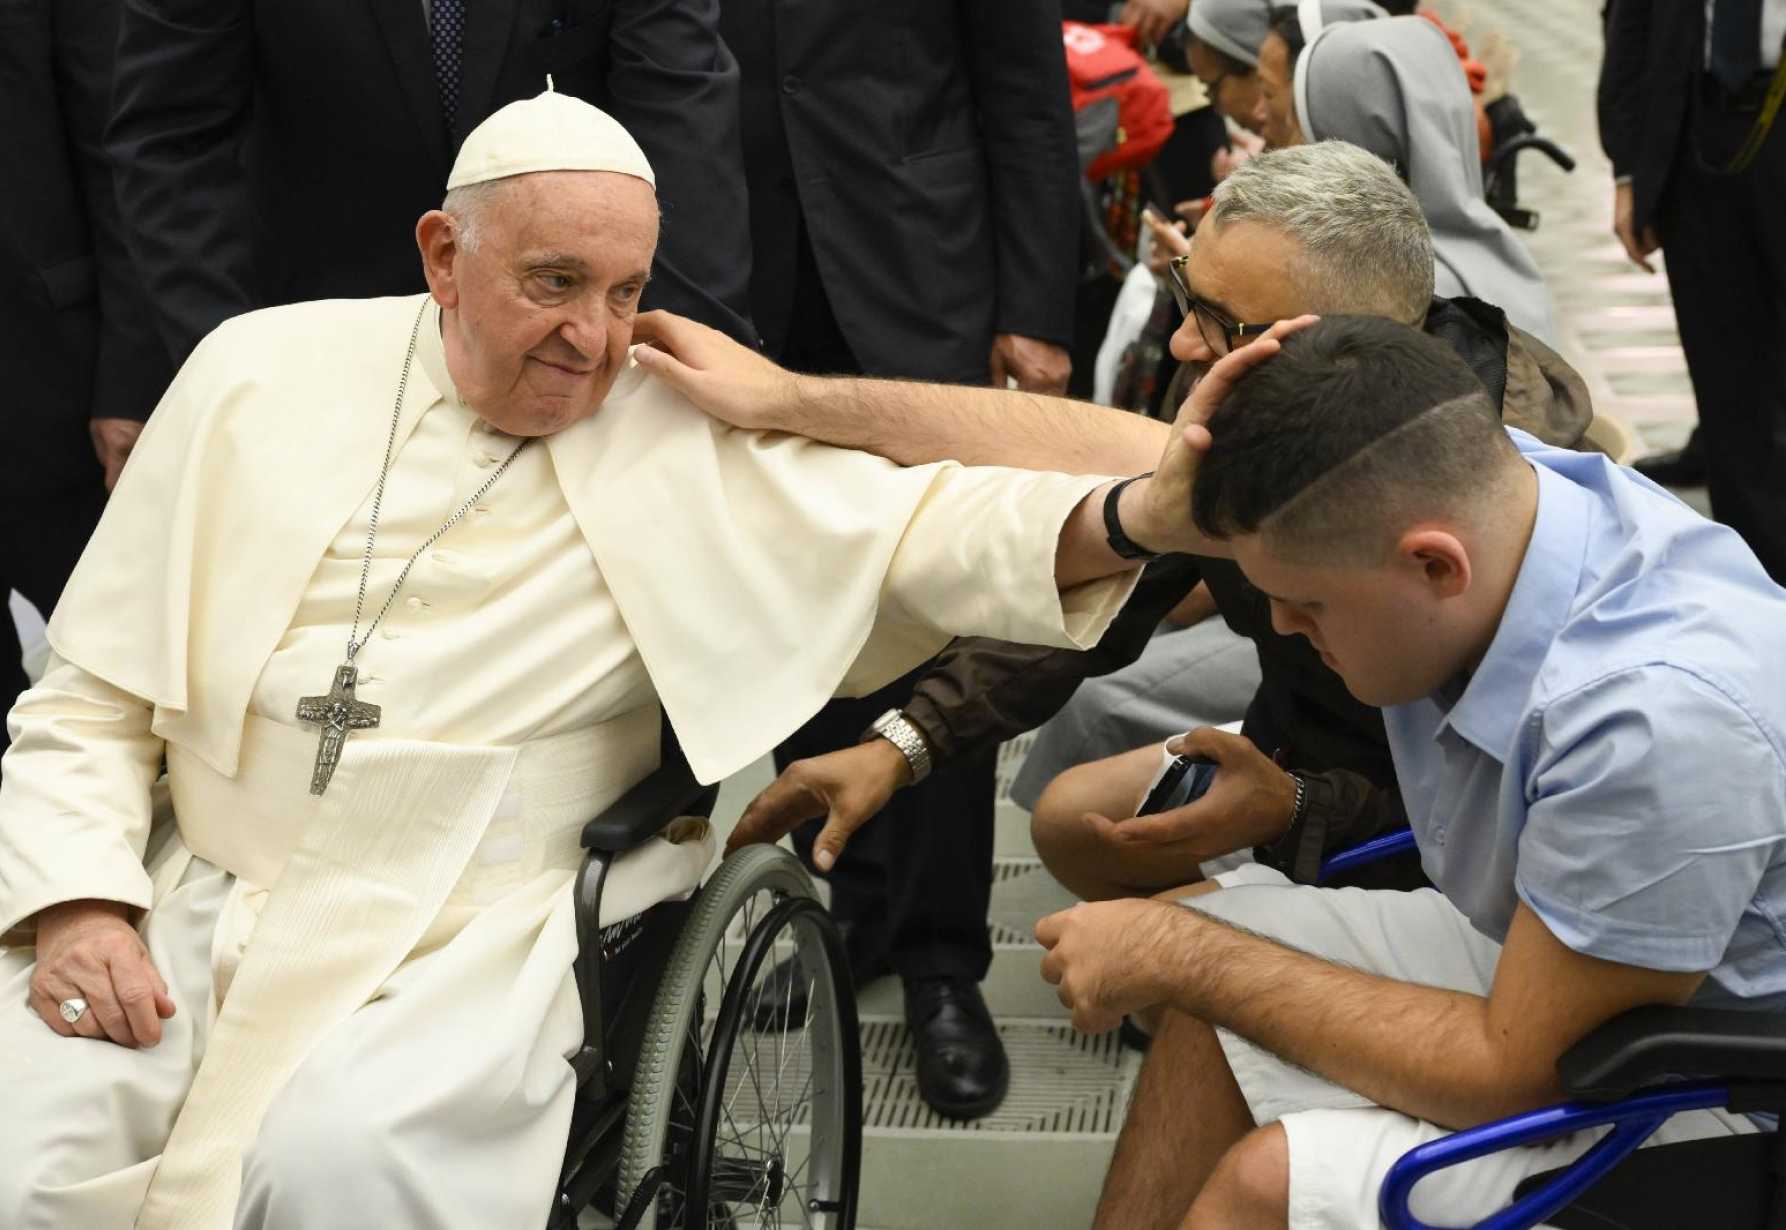 WYD pilgrims showed the world faith can lead to peace, pope says